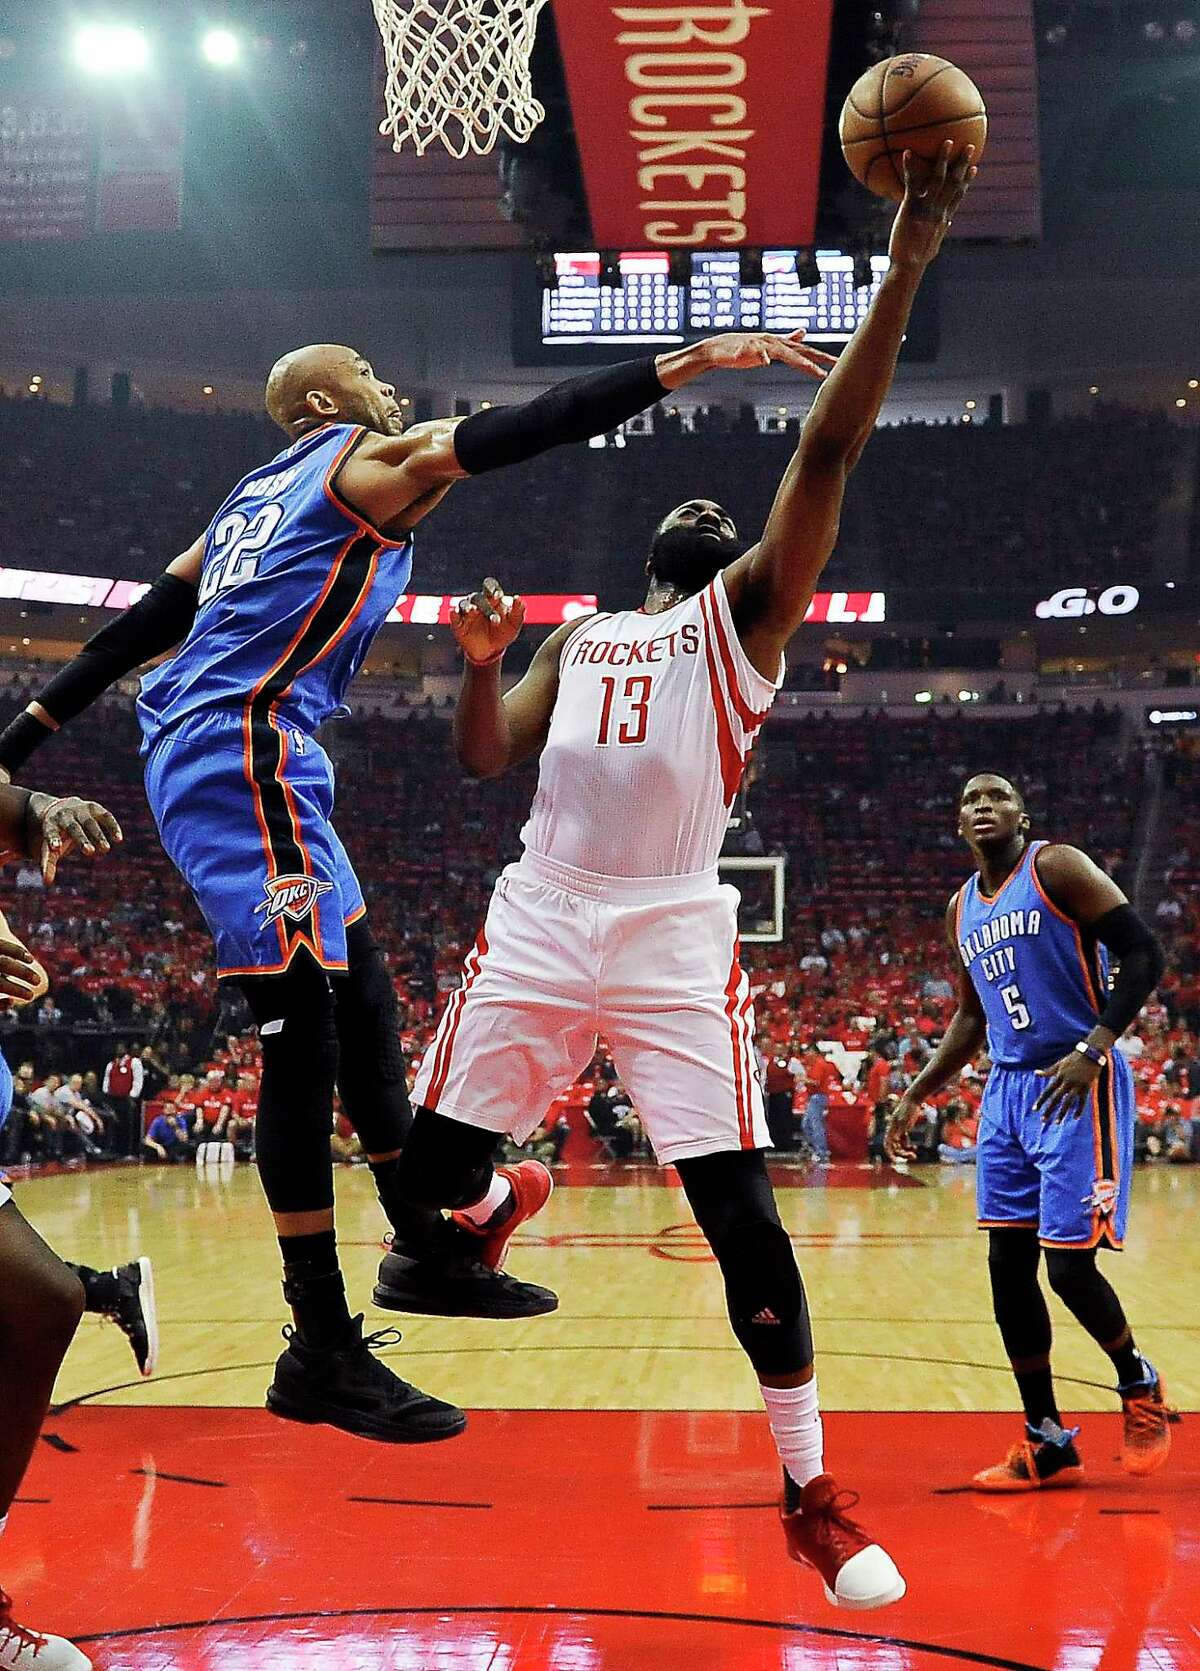 Houston Rockets guard James Harden (13) shoots as Oklahoma City Thunder forward Taj Gibson defends during the first half in Game 2 of an NBA basketball first-round playoff series, Wednesday, April 19, 2017, in Houston. (AP Photo/Eric Christian Smith)